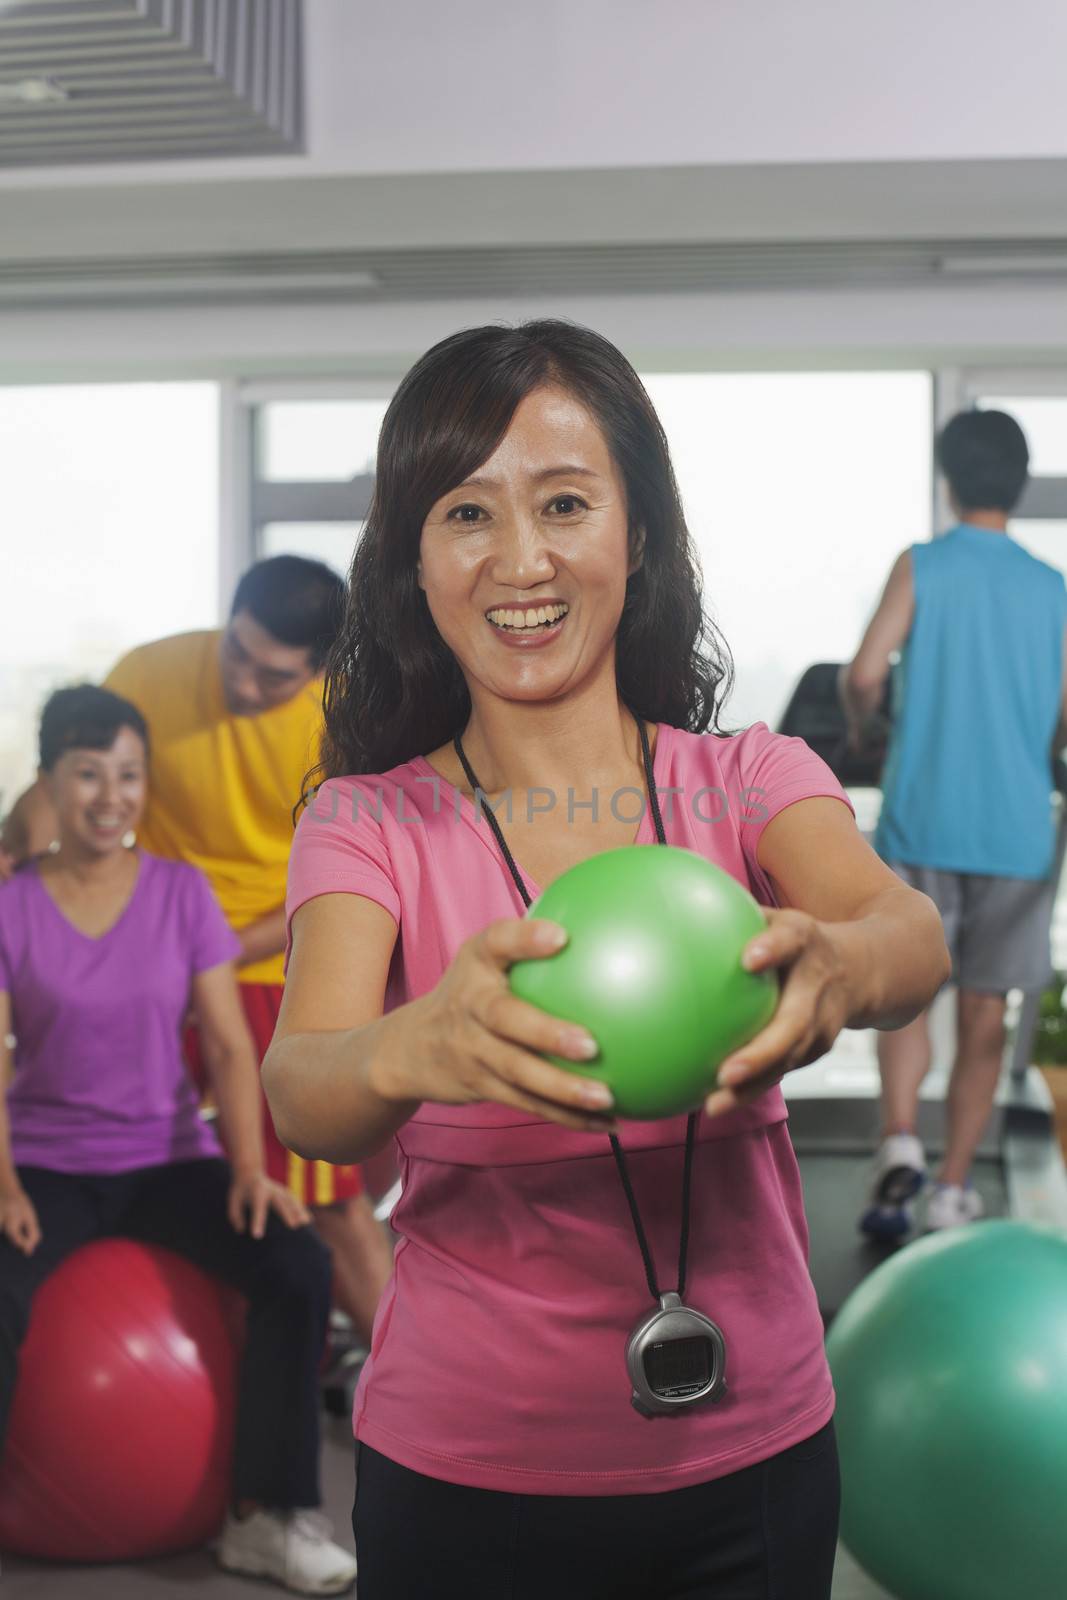 Woman holding ball on foreground, people working out in the gym on the background